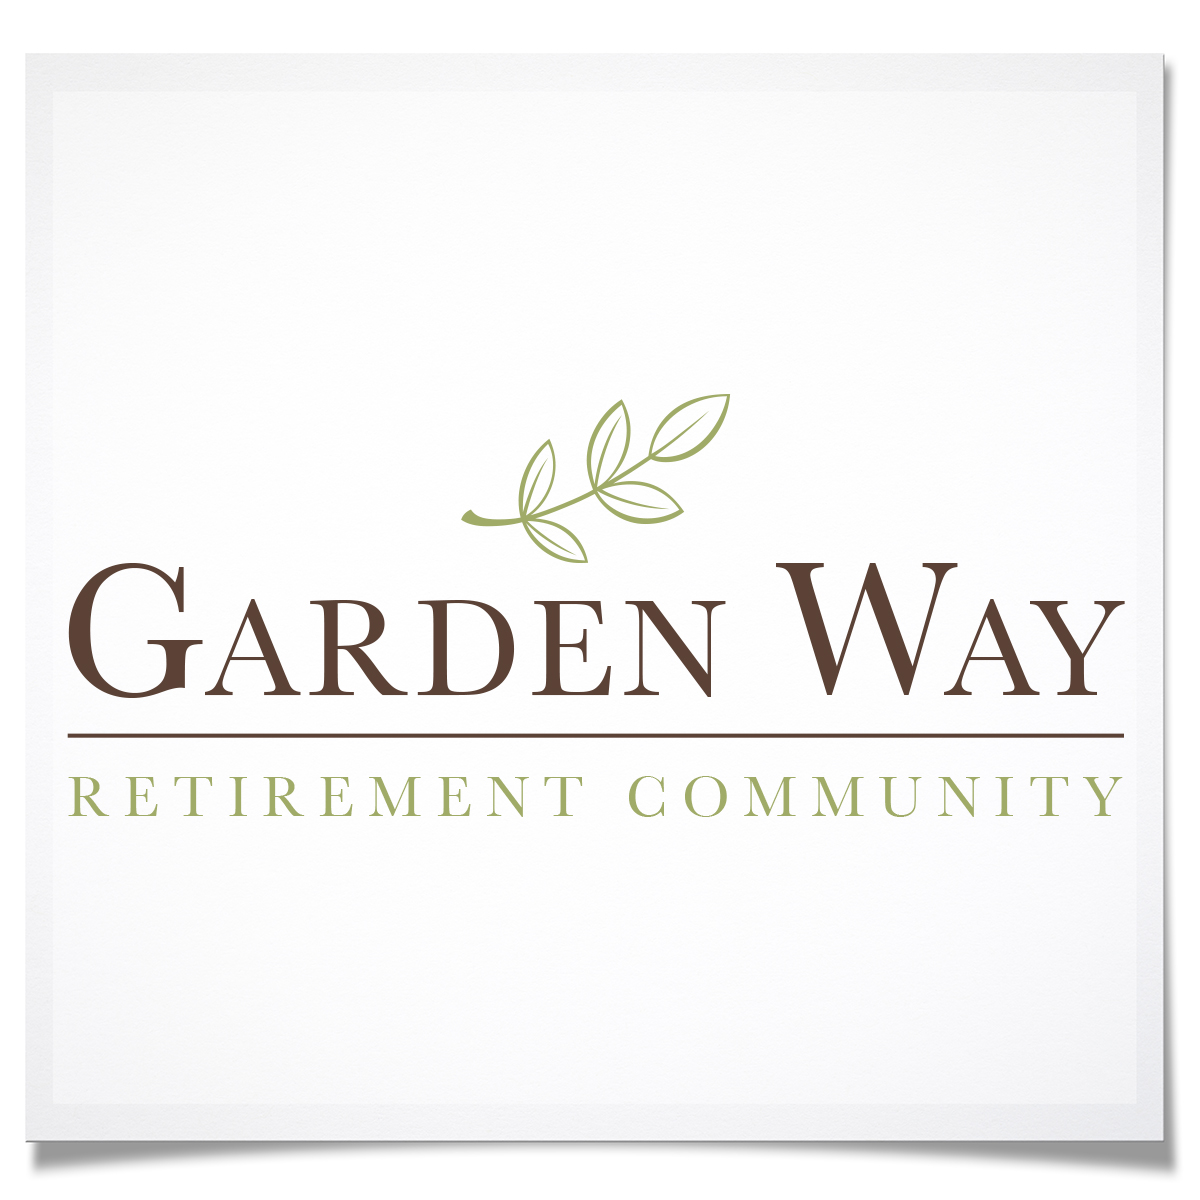 Garden Way Retirement Community Welcomes New Executive Director - Ronald Glover Joins Eugene, Oregon Luxury Independent Living Community